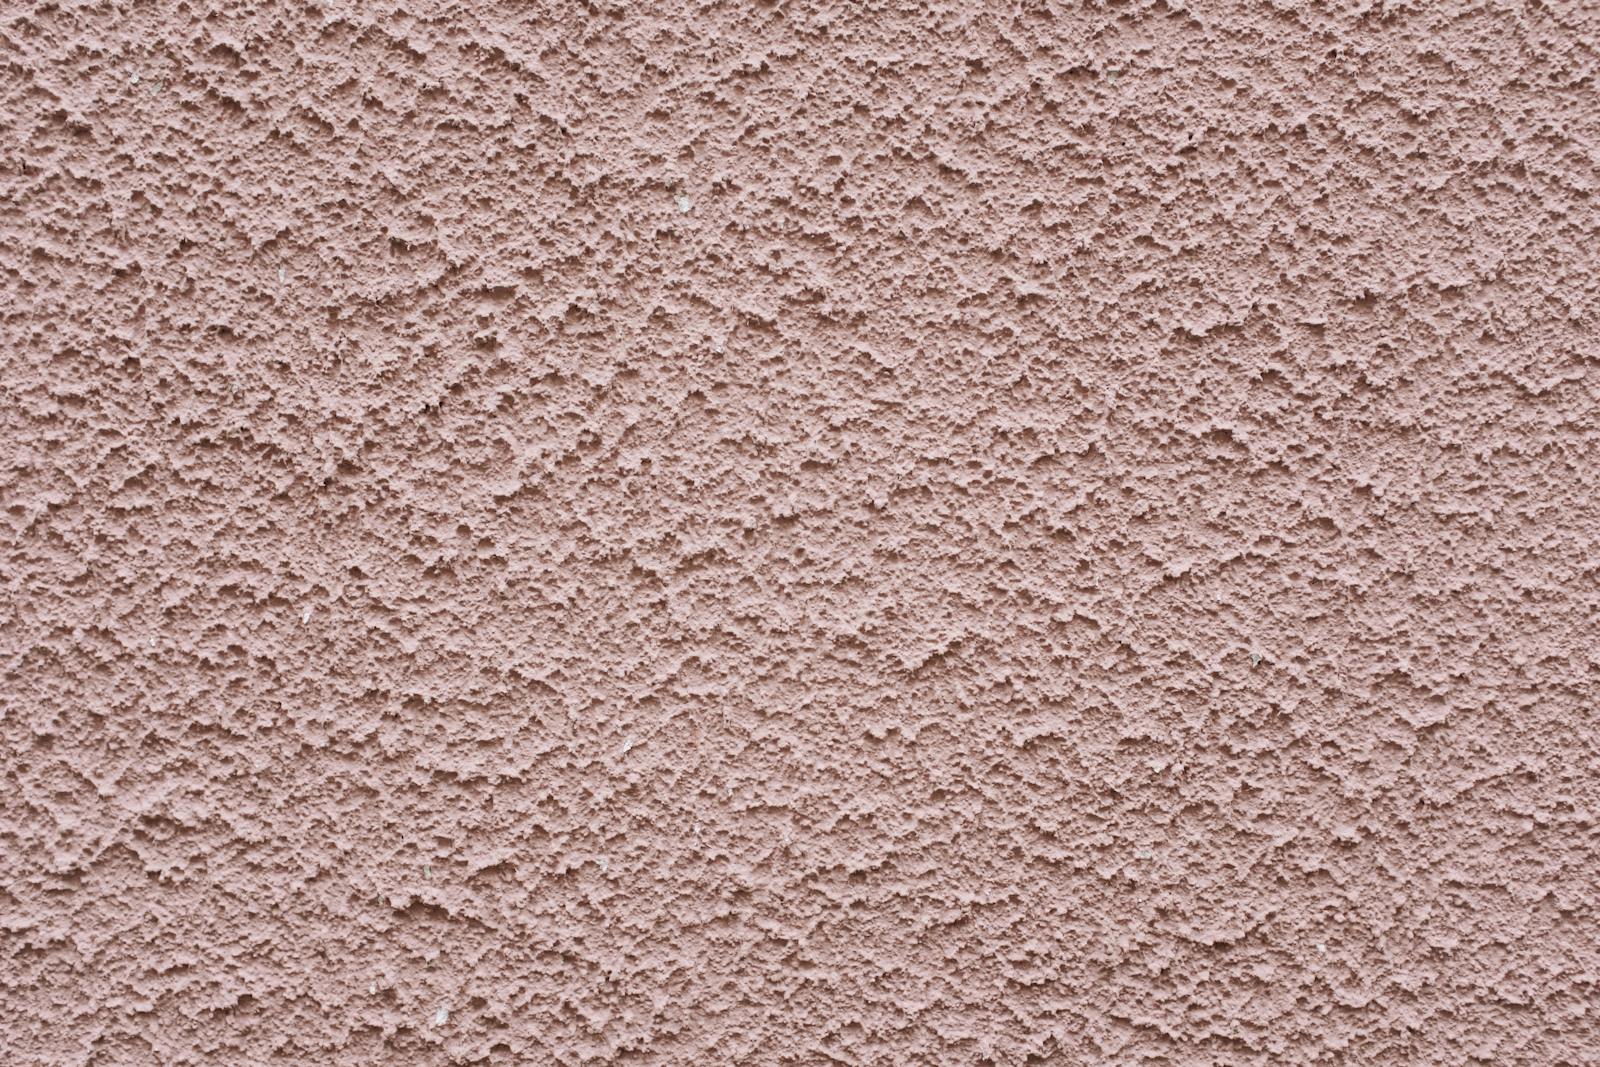 Simple background of uneven stucco pink wall surface of modern building in city